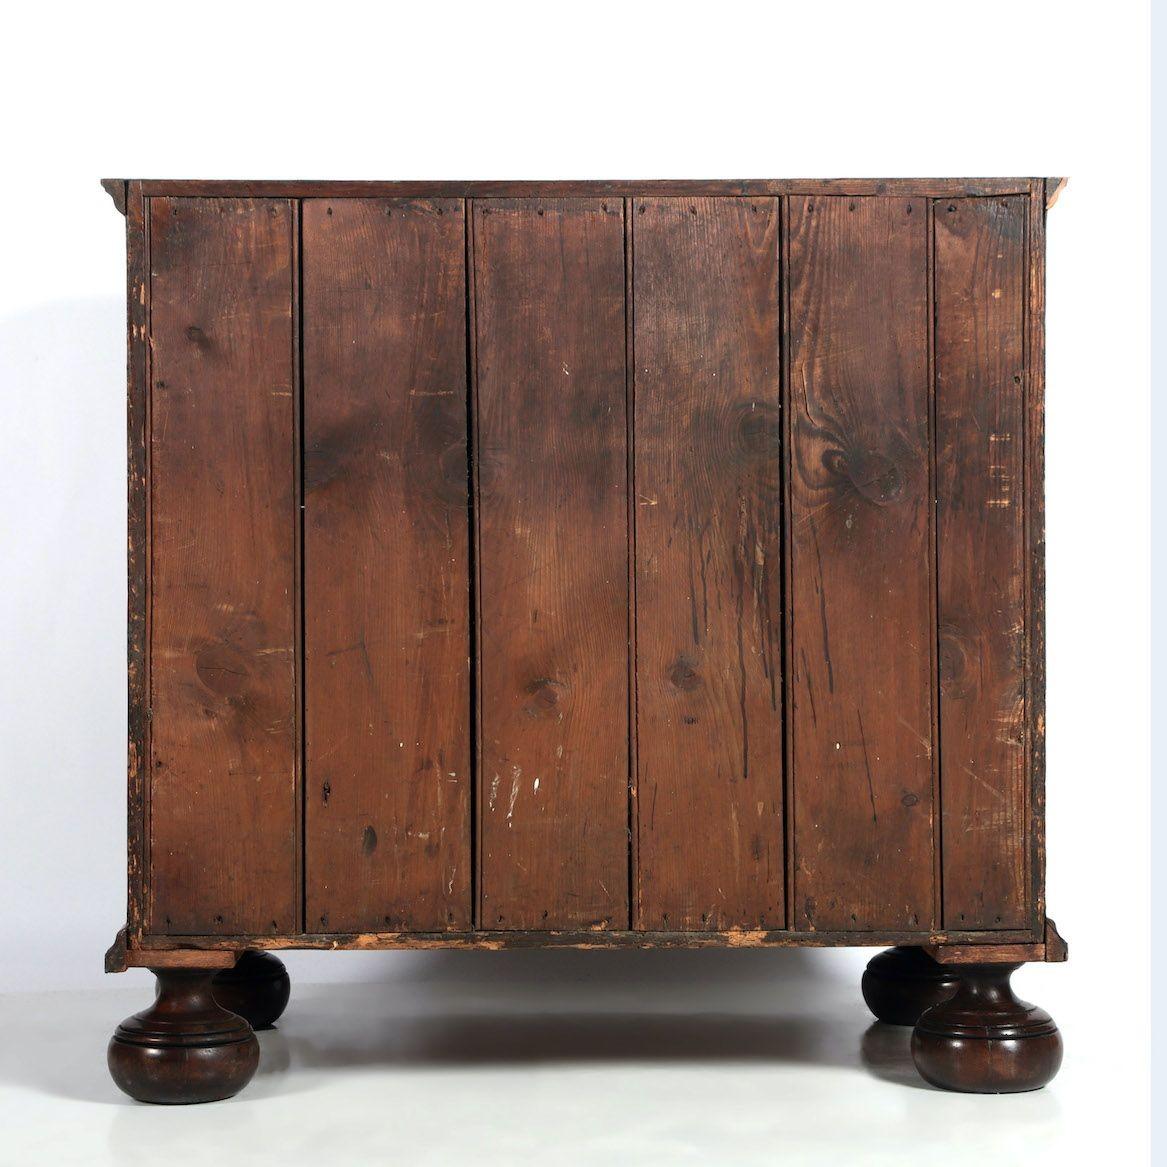 17th c. English William & Mary Walnut and Ebony Seaweed Marquetry Commode For Sale 12